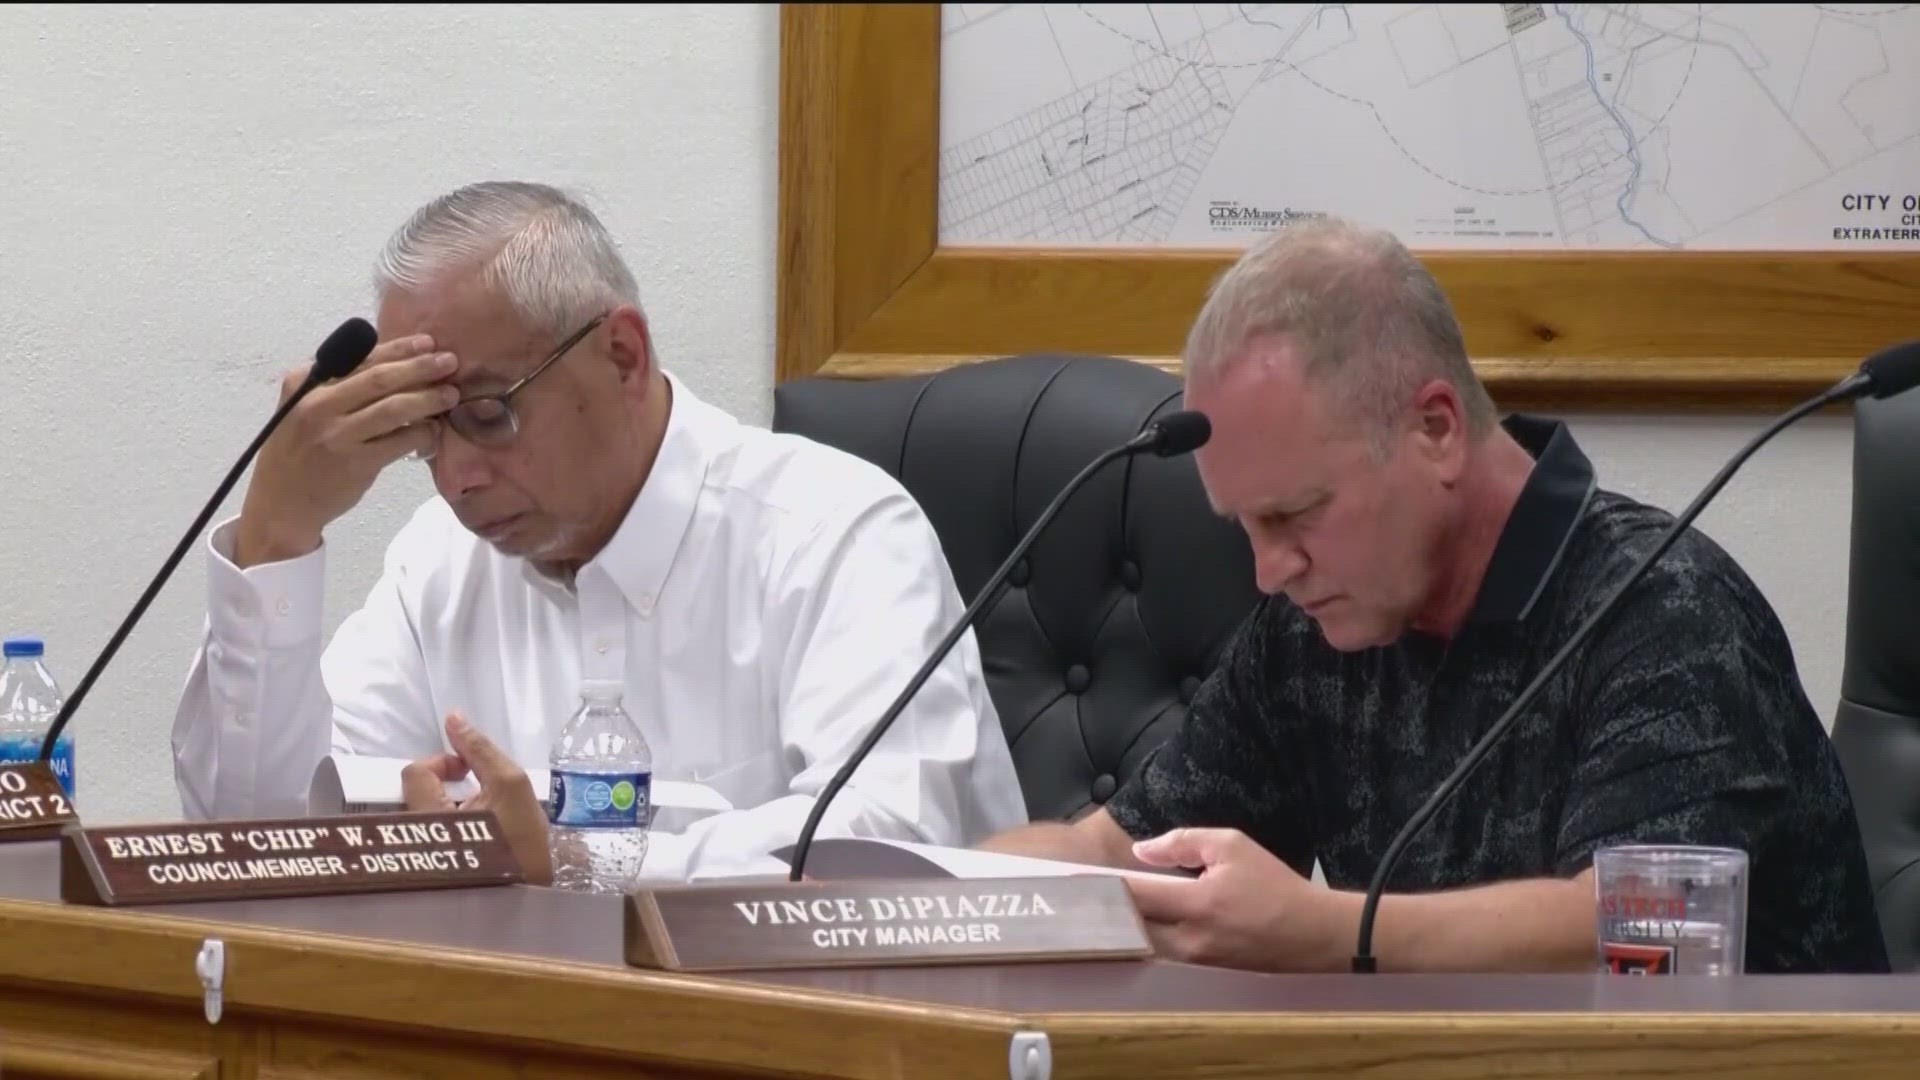 This was the first city council meeting since the former Uvalde mayor announced his retirement.